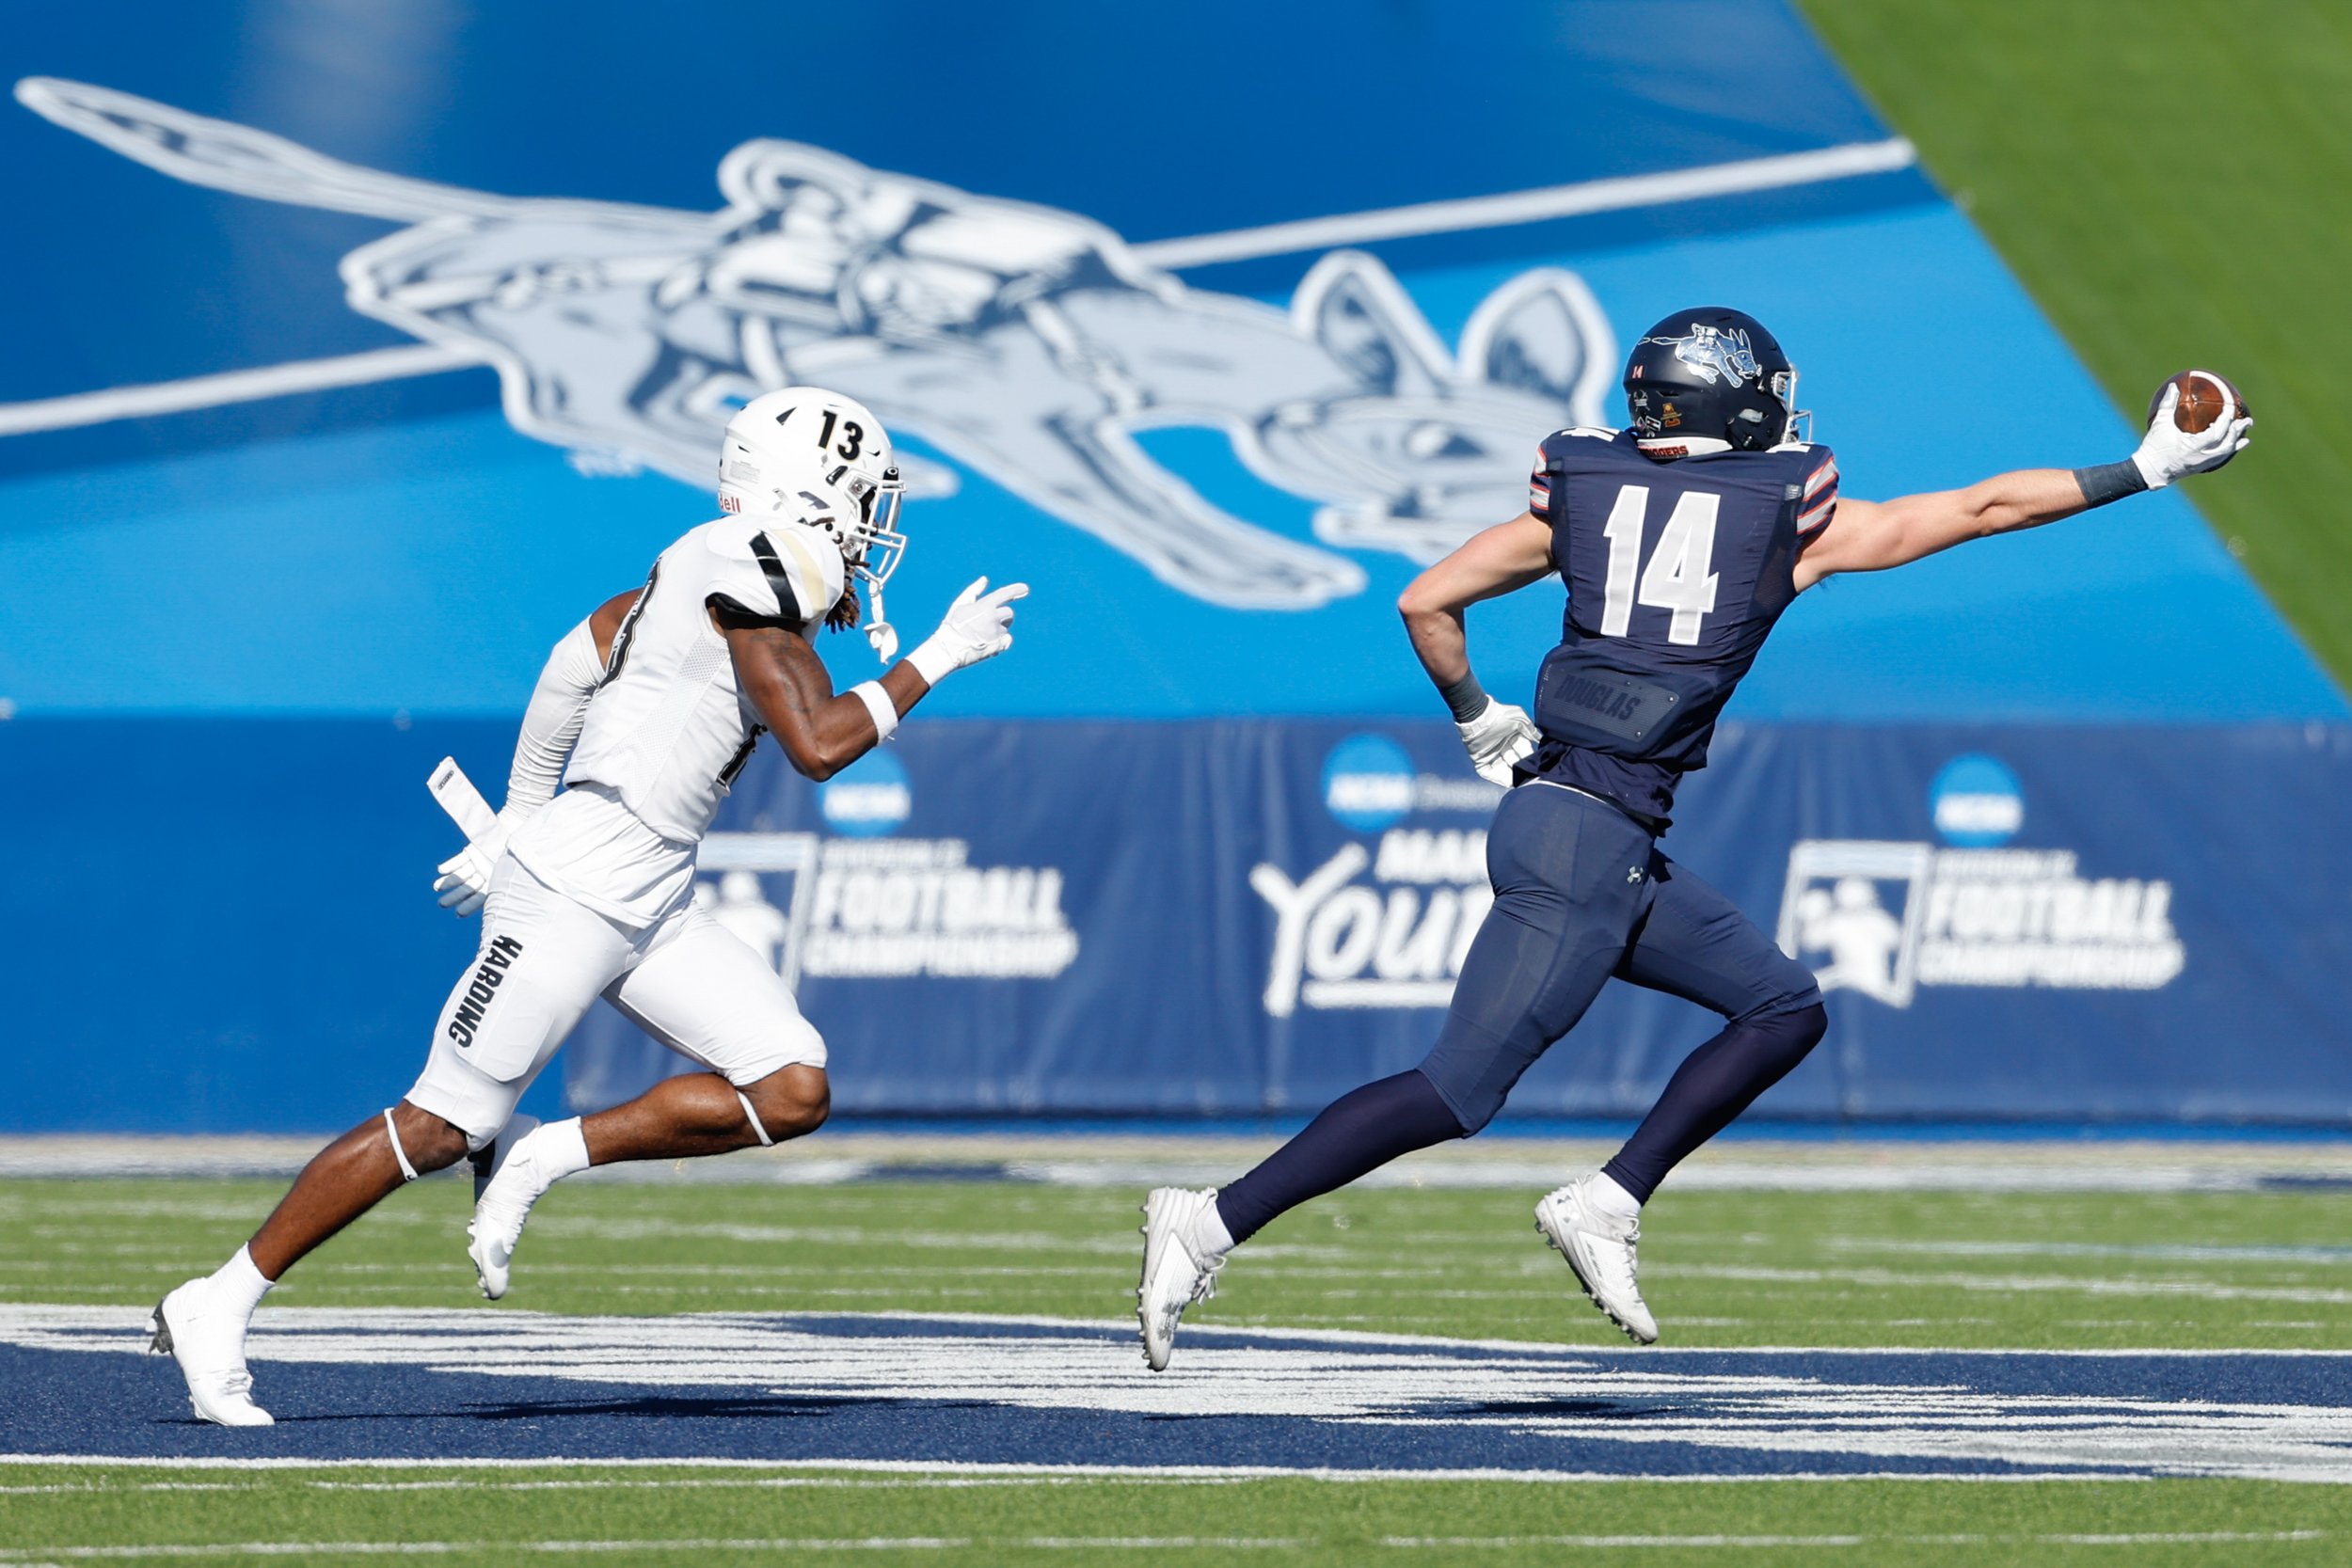  MCKINNEY, TEXAS - DECEMBER 16: Flynn Schiele #14 of Colorado School of Mines Orediggers makes a catch against the Harding Bisons during the Division II Football Championship held at McKinney ISD Stadium on December 16, 2023 in McKinney, Texas. (Phot